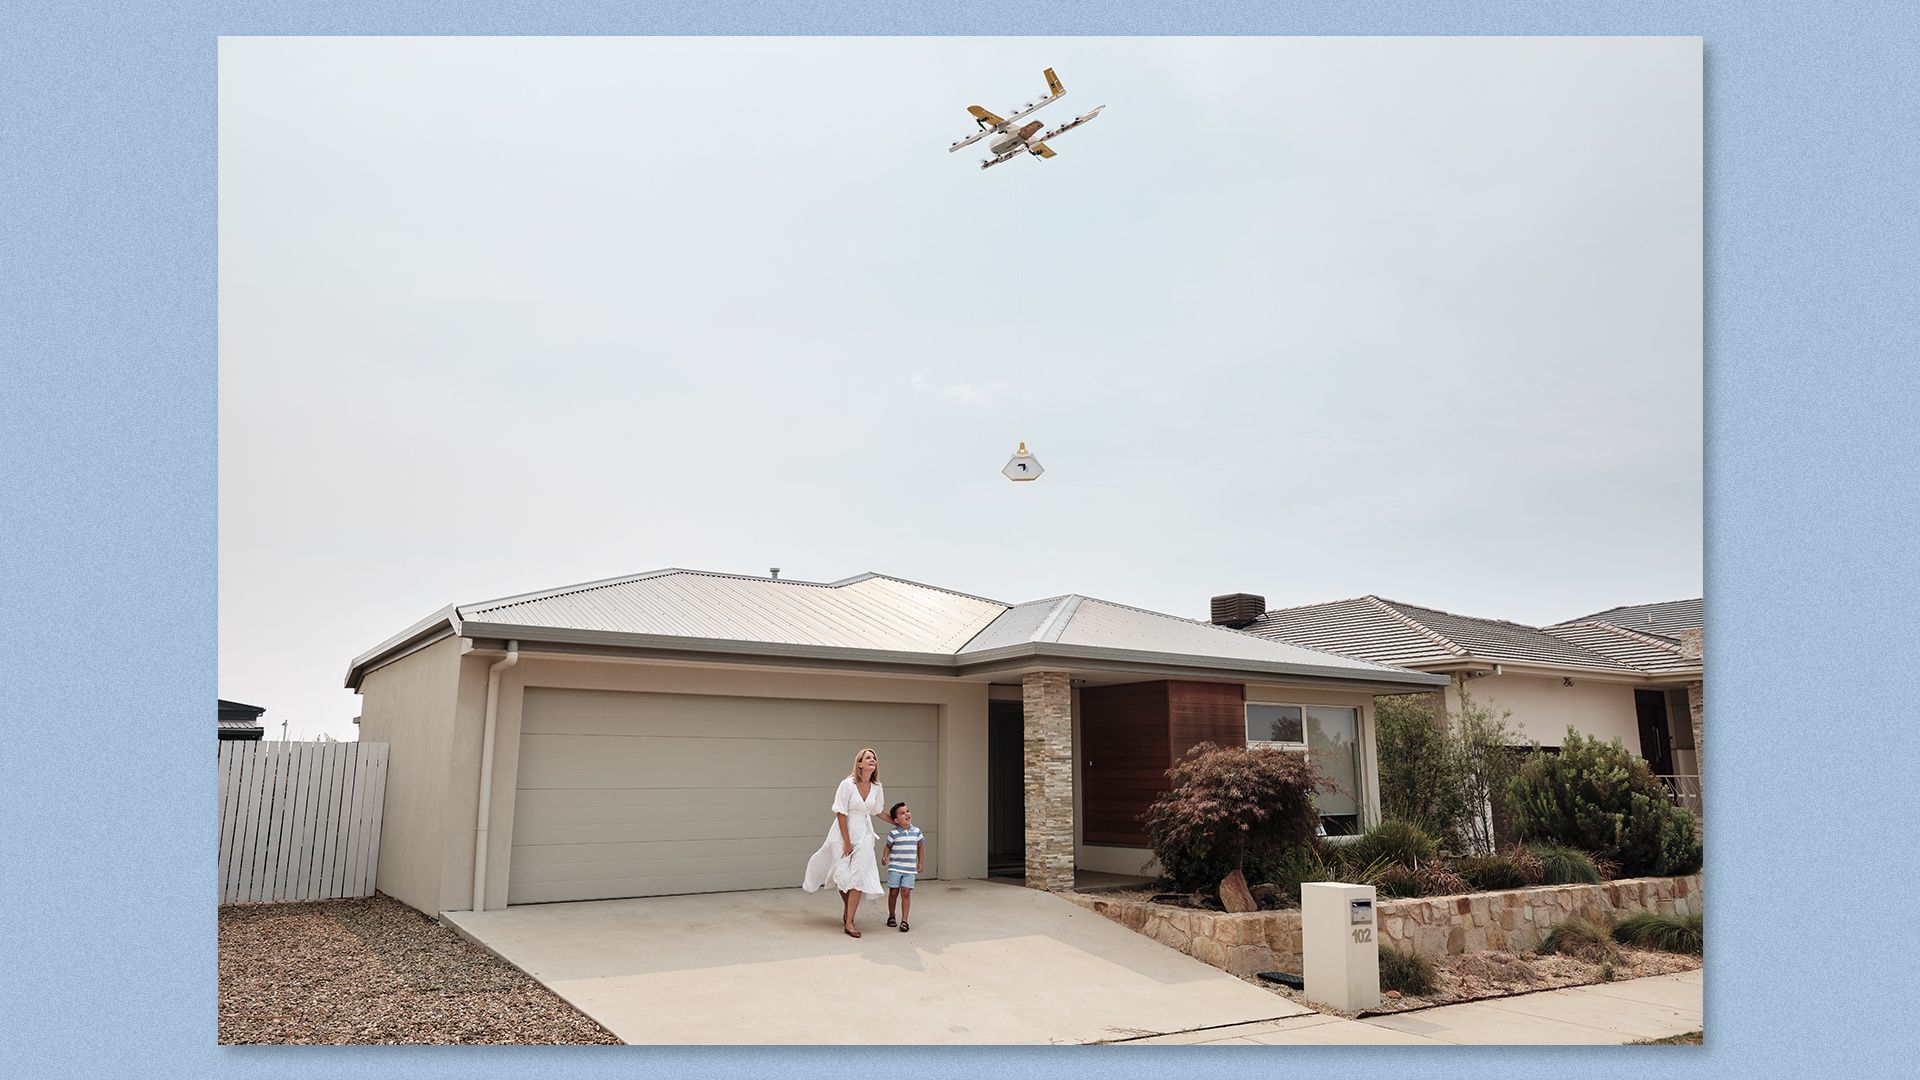 Image of a Wing drone delivering a package to a family's driveway in Logan, Australia